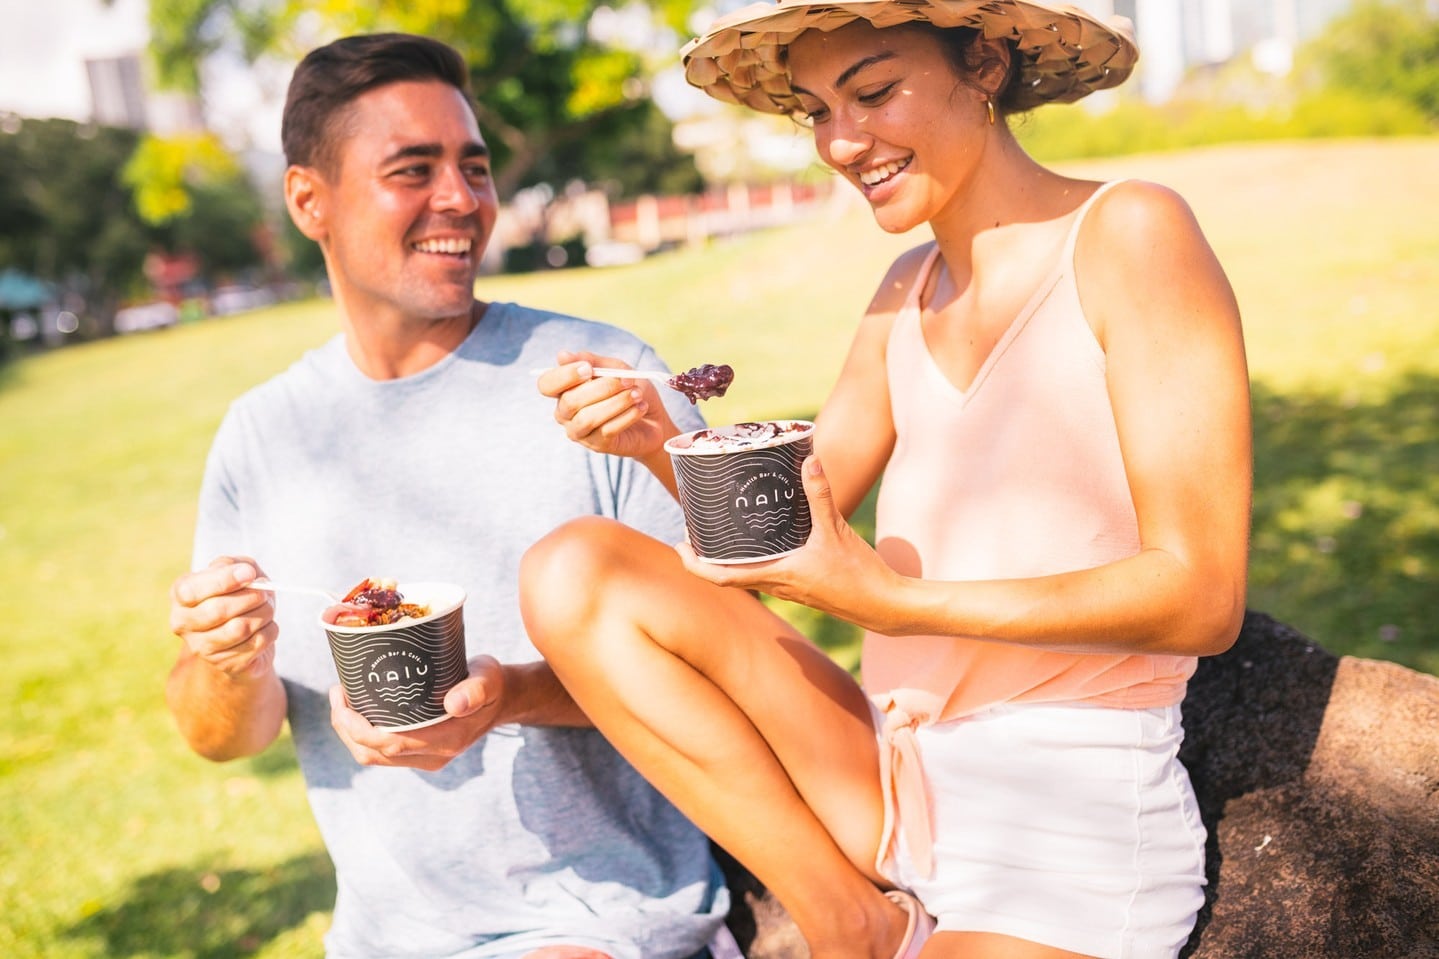 This summer, enjoy a picnic at one of the beautiful parks or beaches that surround Ward Village. Choose from a variety of neighborhood eateries like @naluhealthbar, @fatcheekshawaii or @llhawaiianbbq and pick up delicious grab-and-go options!